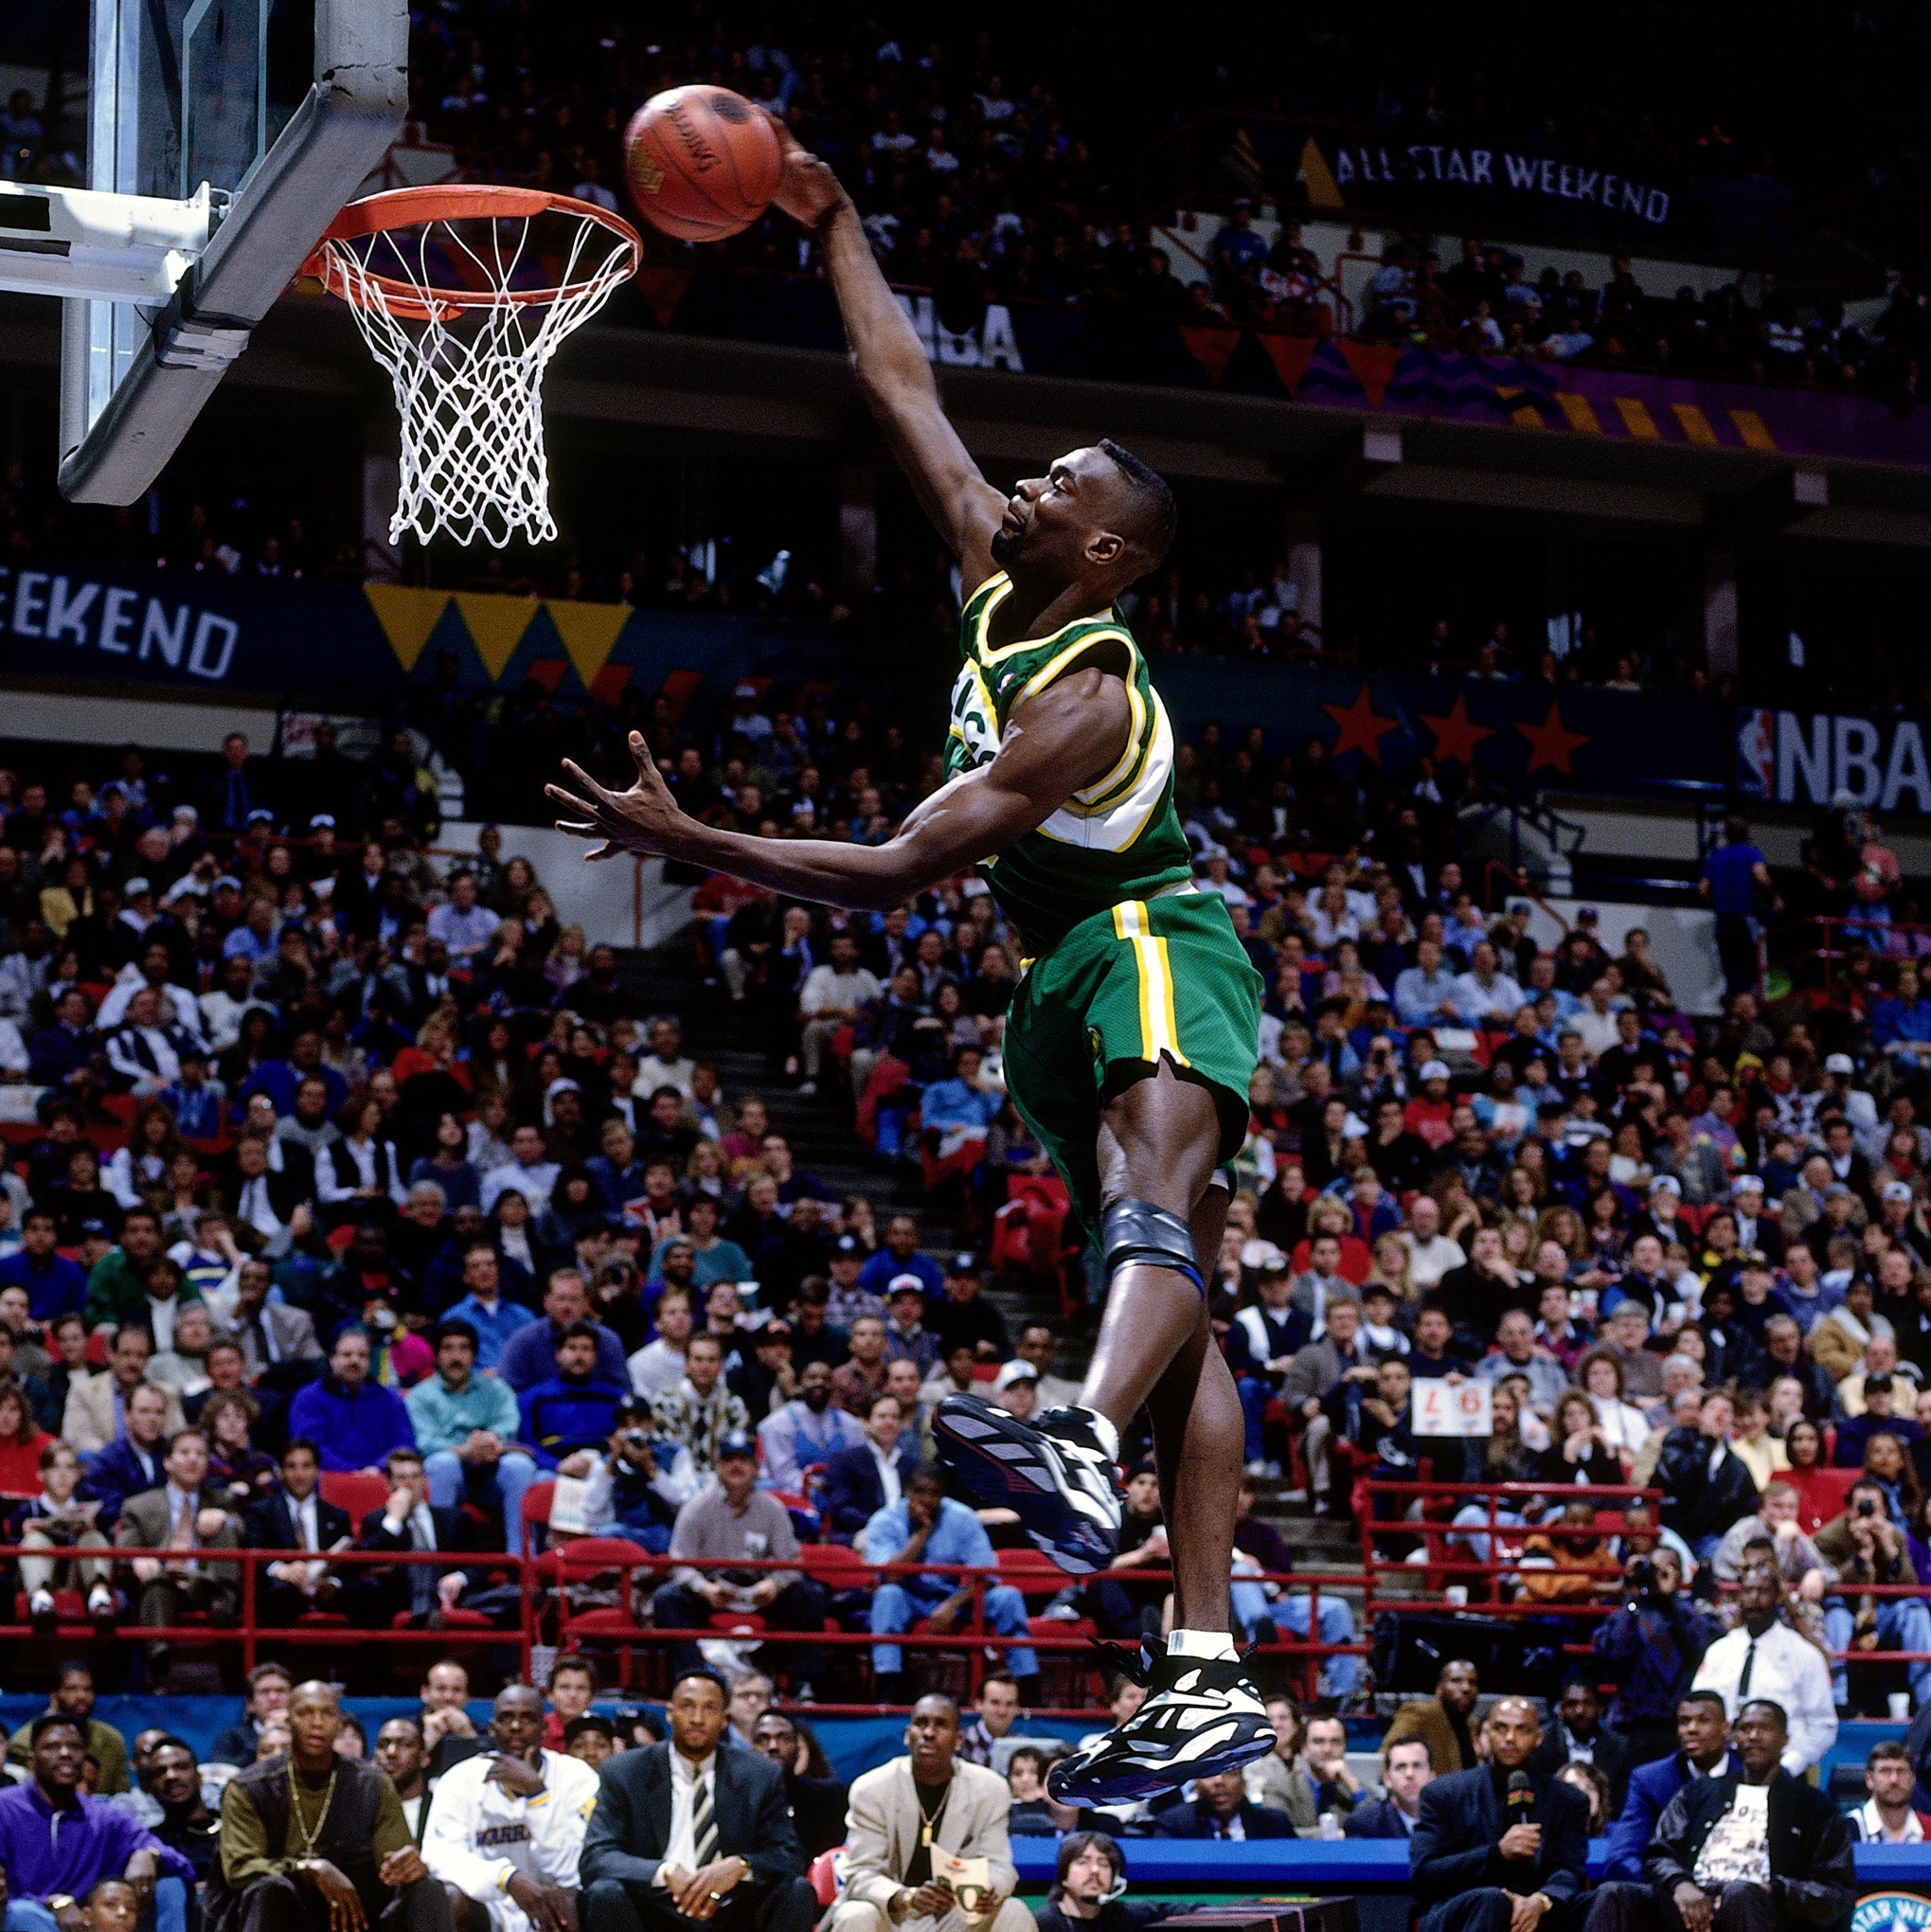 Reign of terror: Shawn Kemp, Gary Payton and the rise of the ...